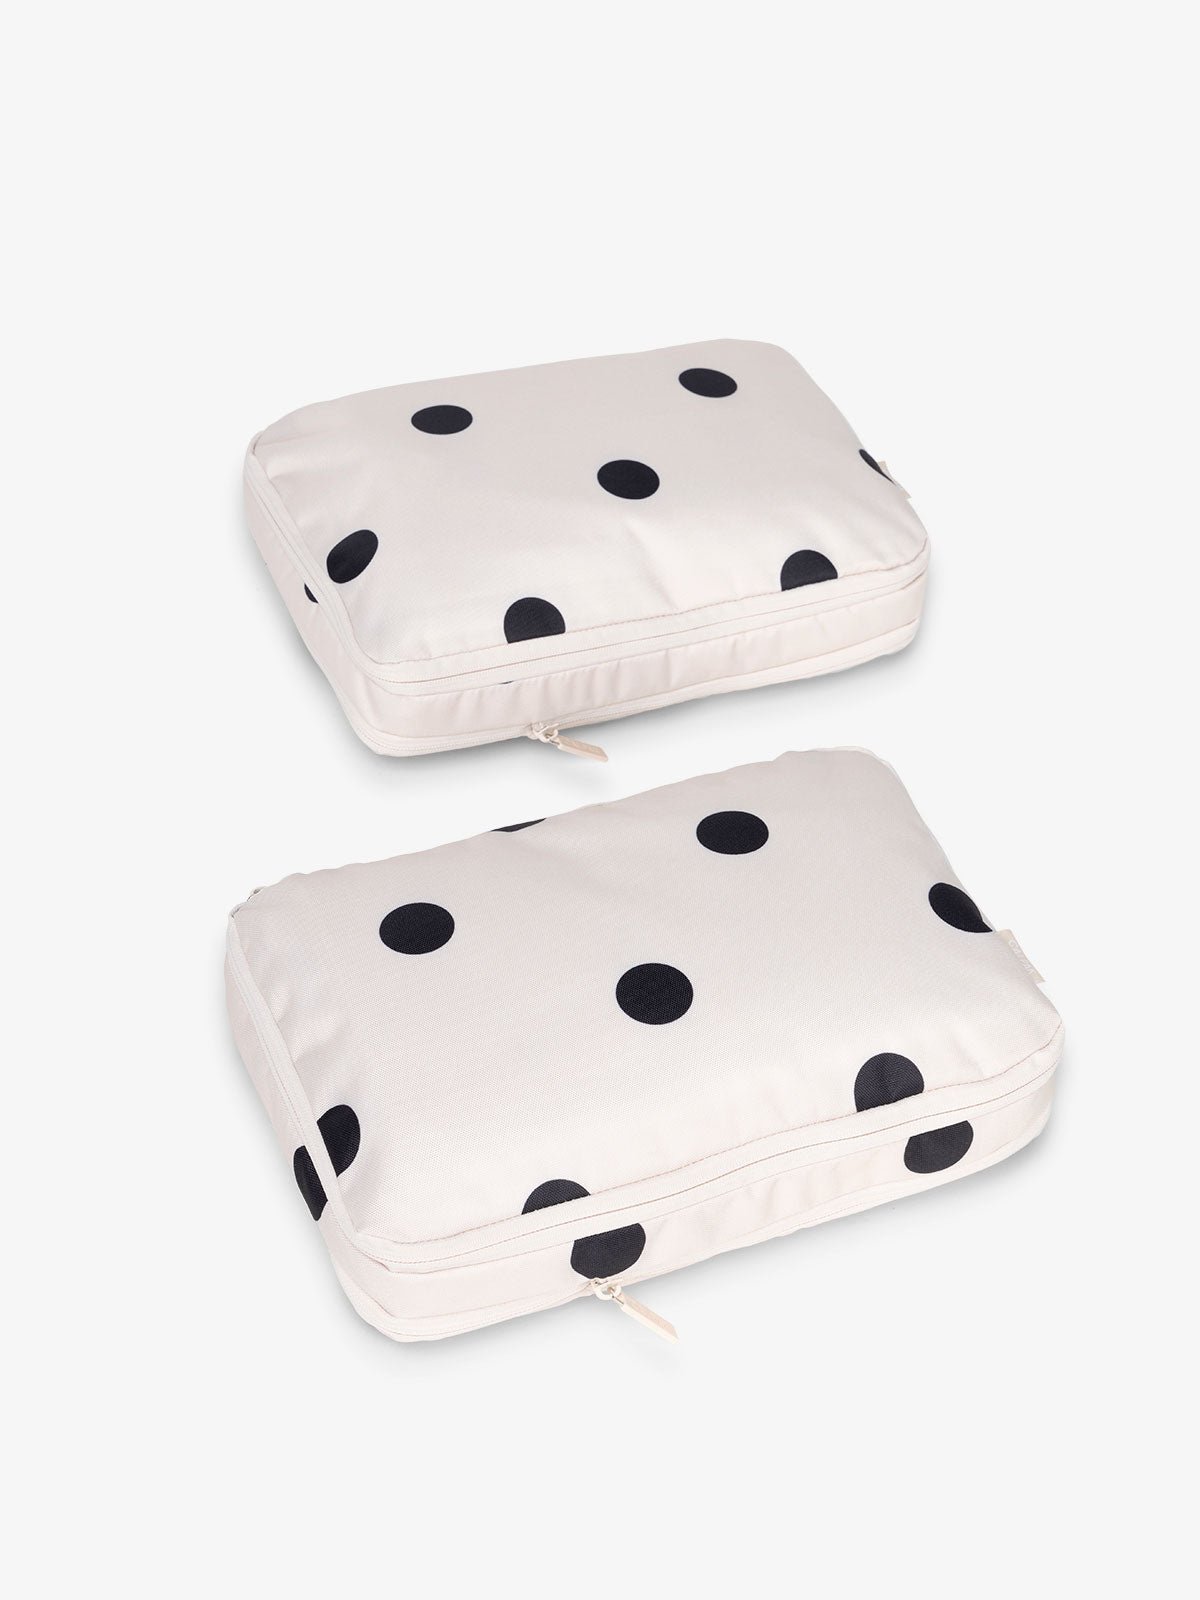 CALPAK compression packing cubes in polka dot